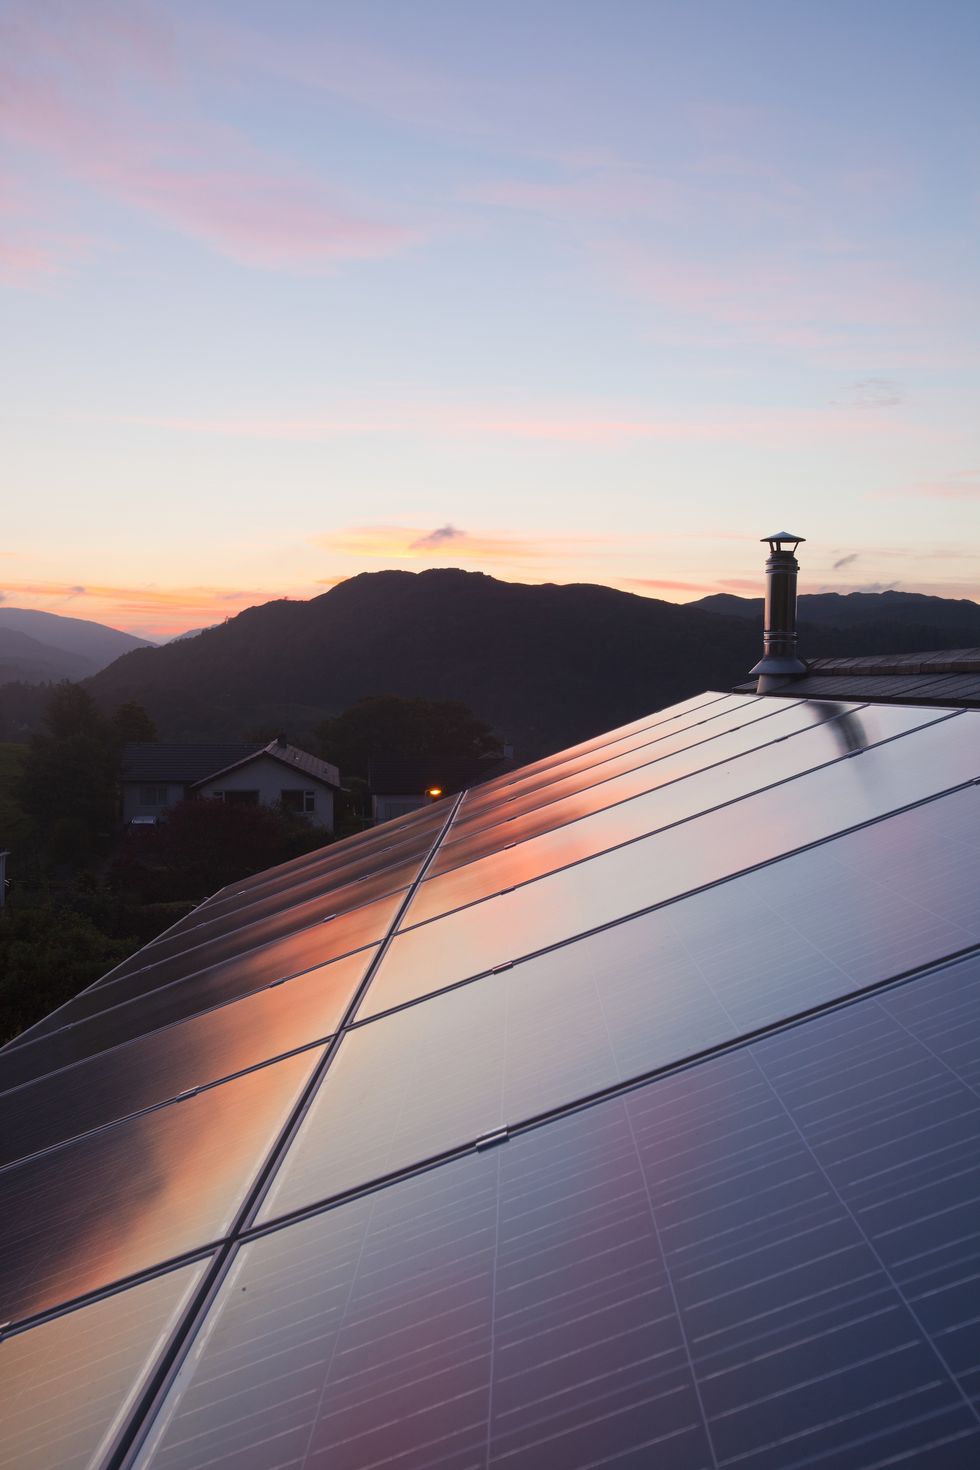 sunset over a house in ambleside, lake district uk, with a 38 kw solar electric panel system on the roof